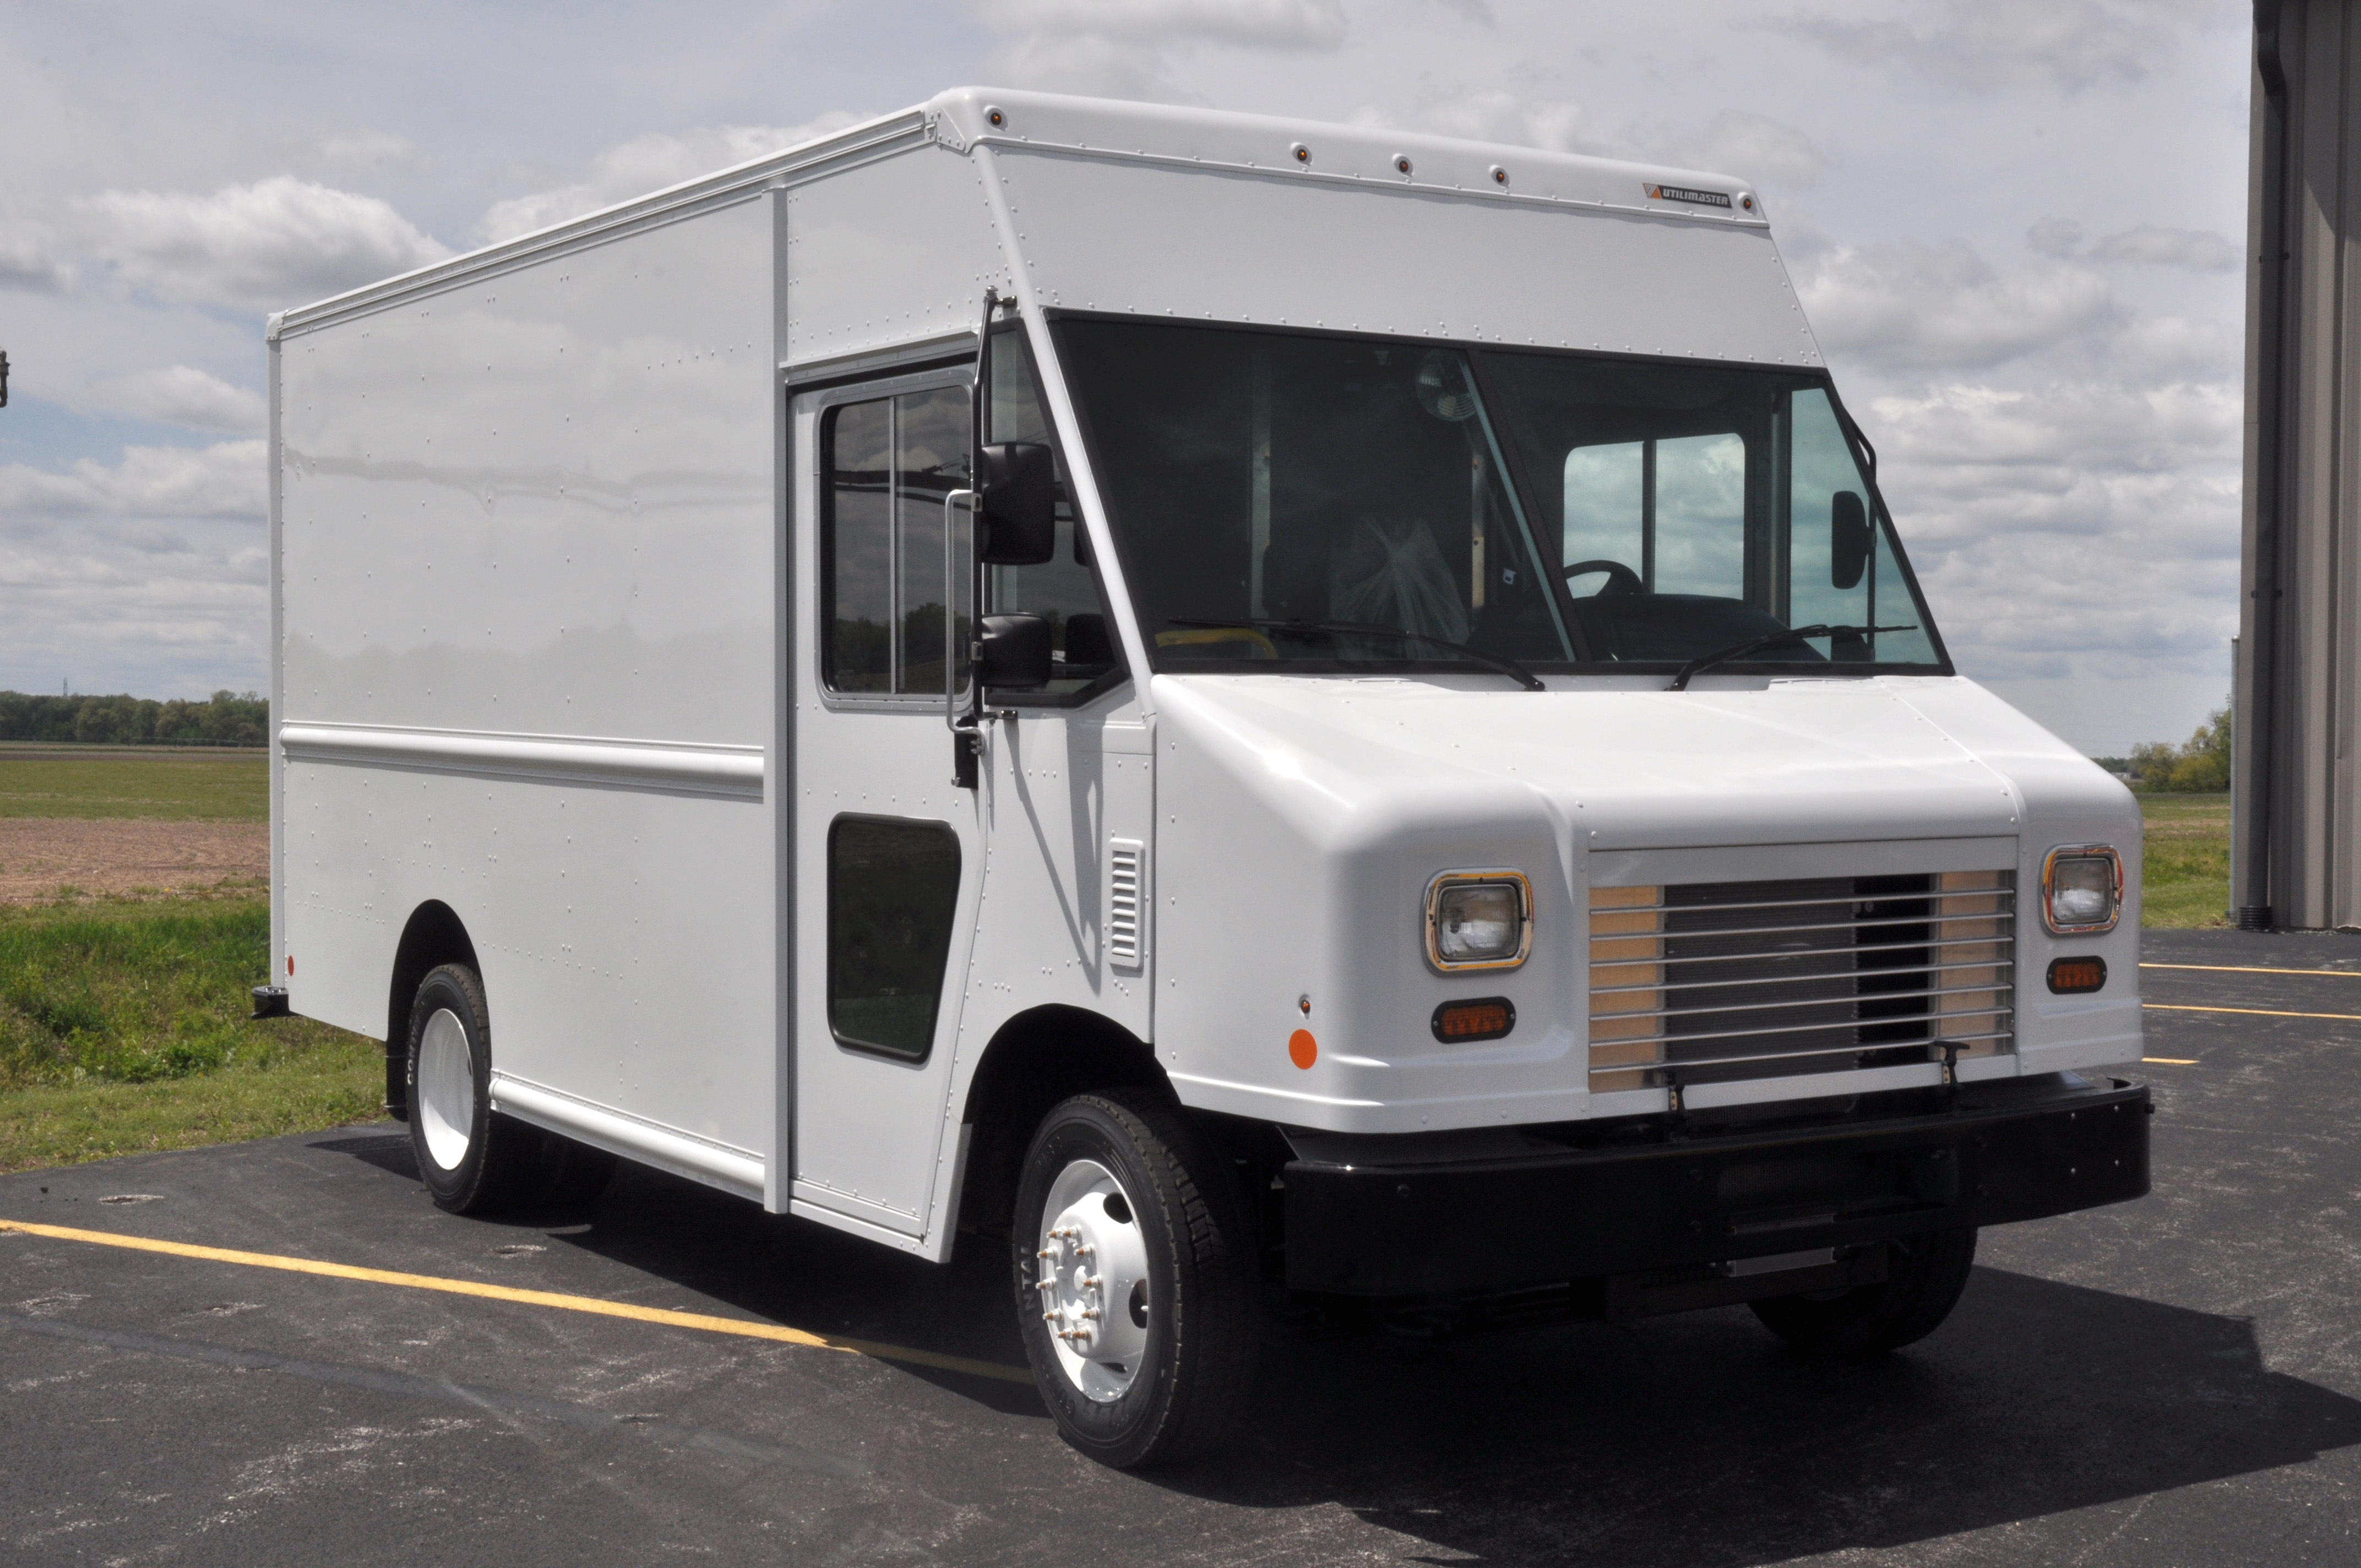 New Delivery Trucks for | Freightliners & Fords for Delivery Contractors